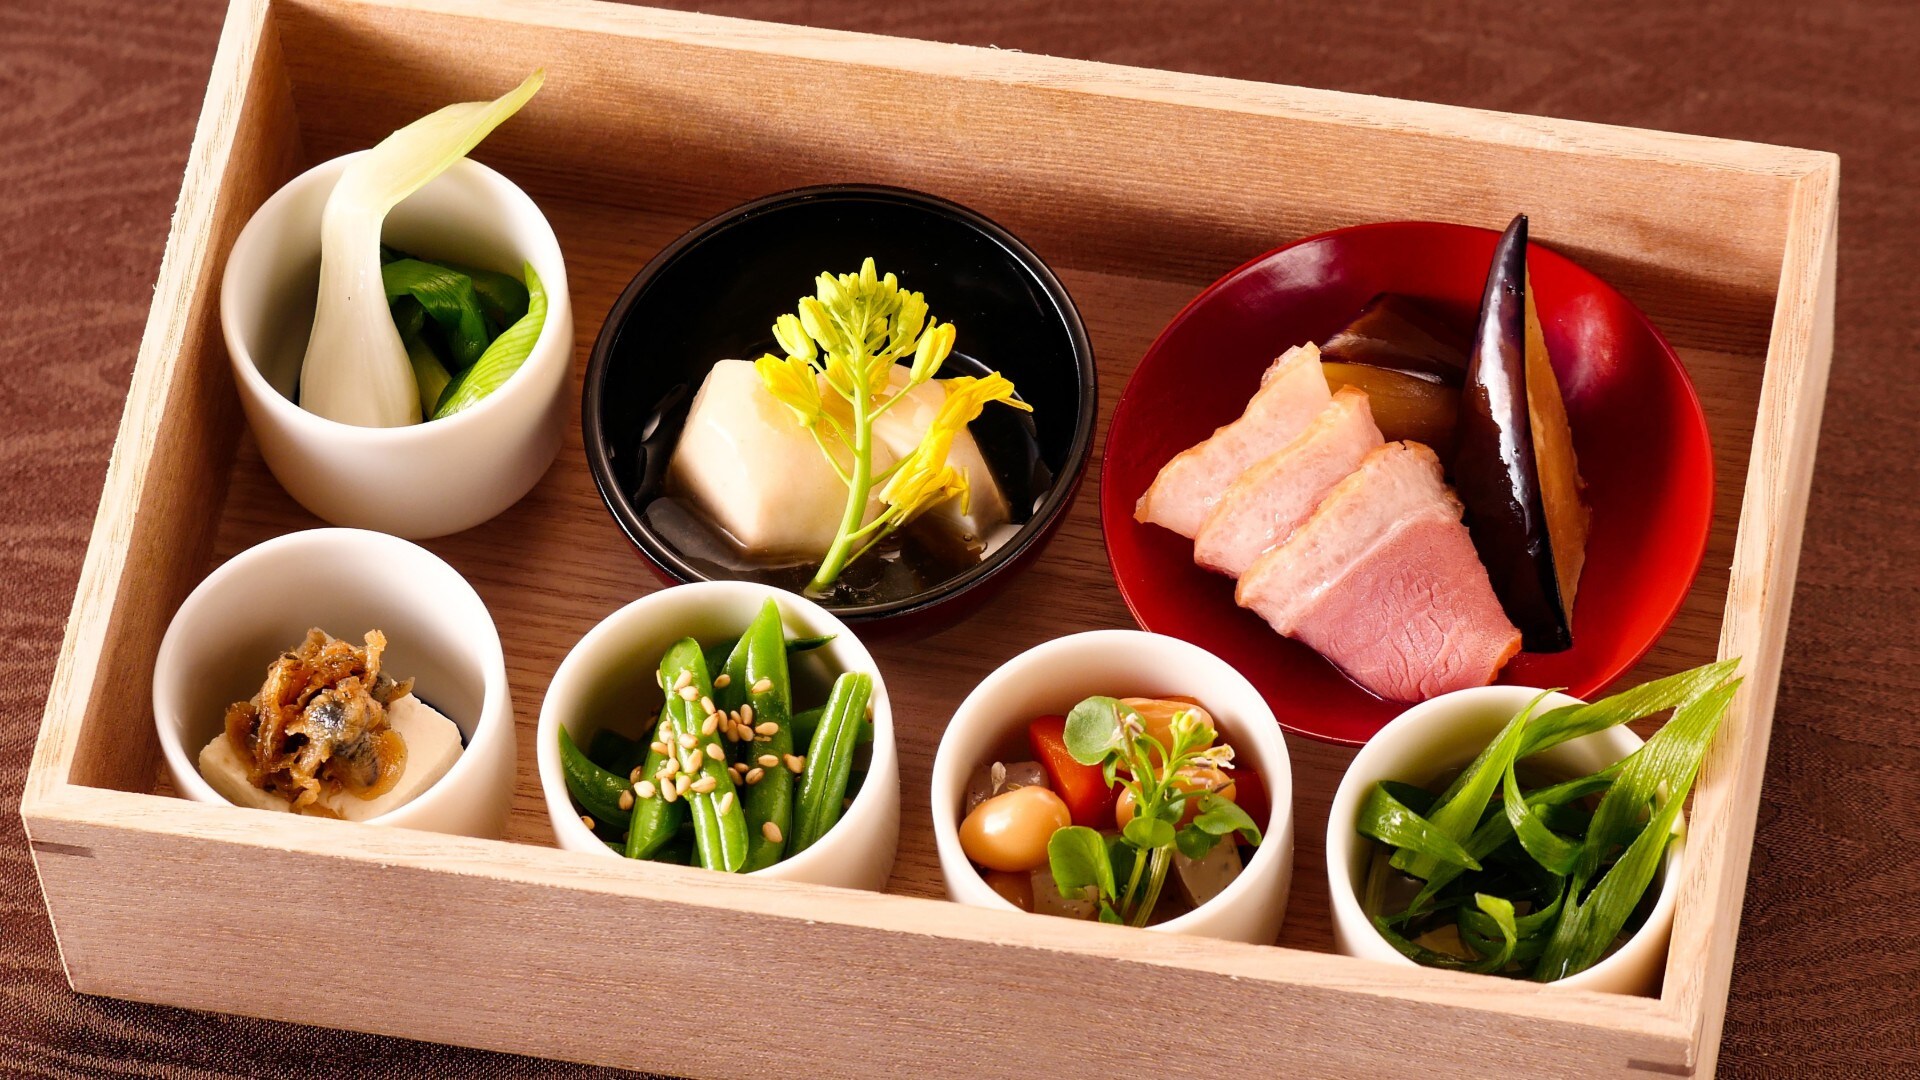 [Meals] A variety of dishes that utilize the taste of the ingredients as they are